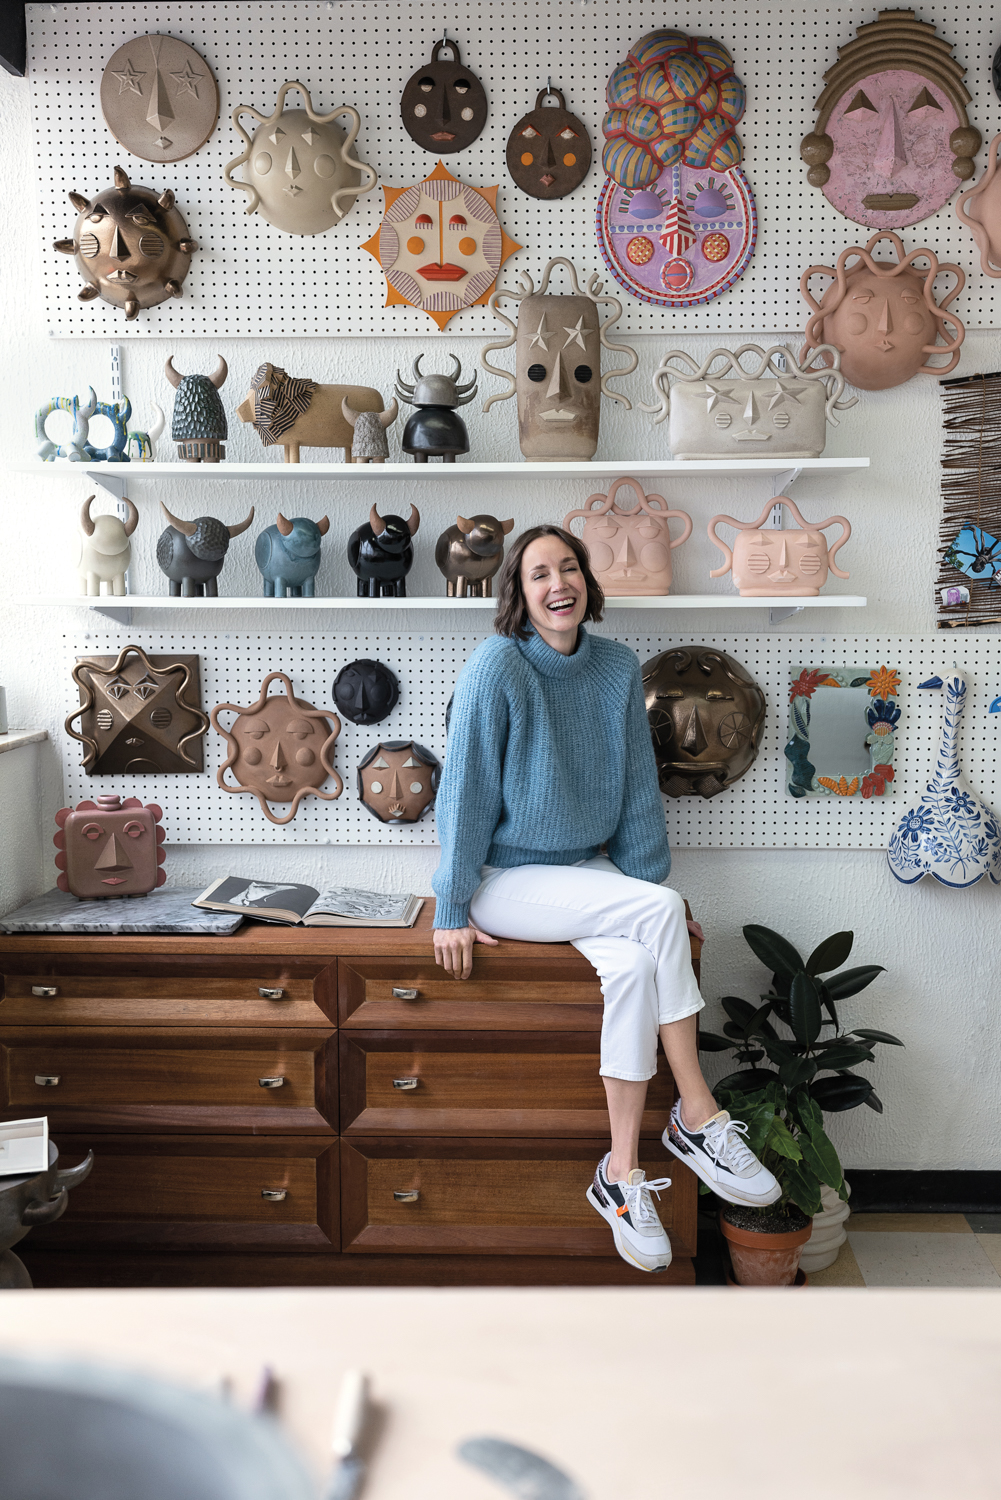 Behind The Whimsical Works Of This Tennessee Ceramicist